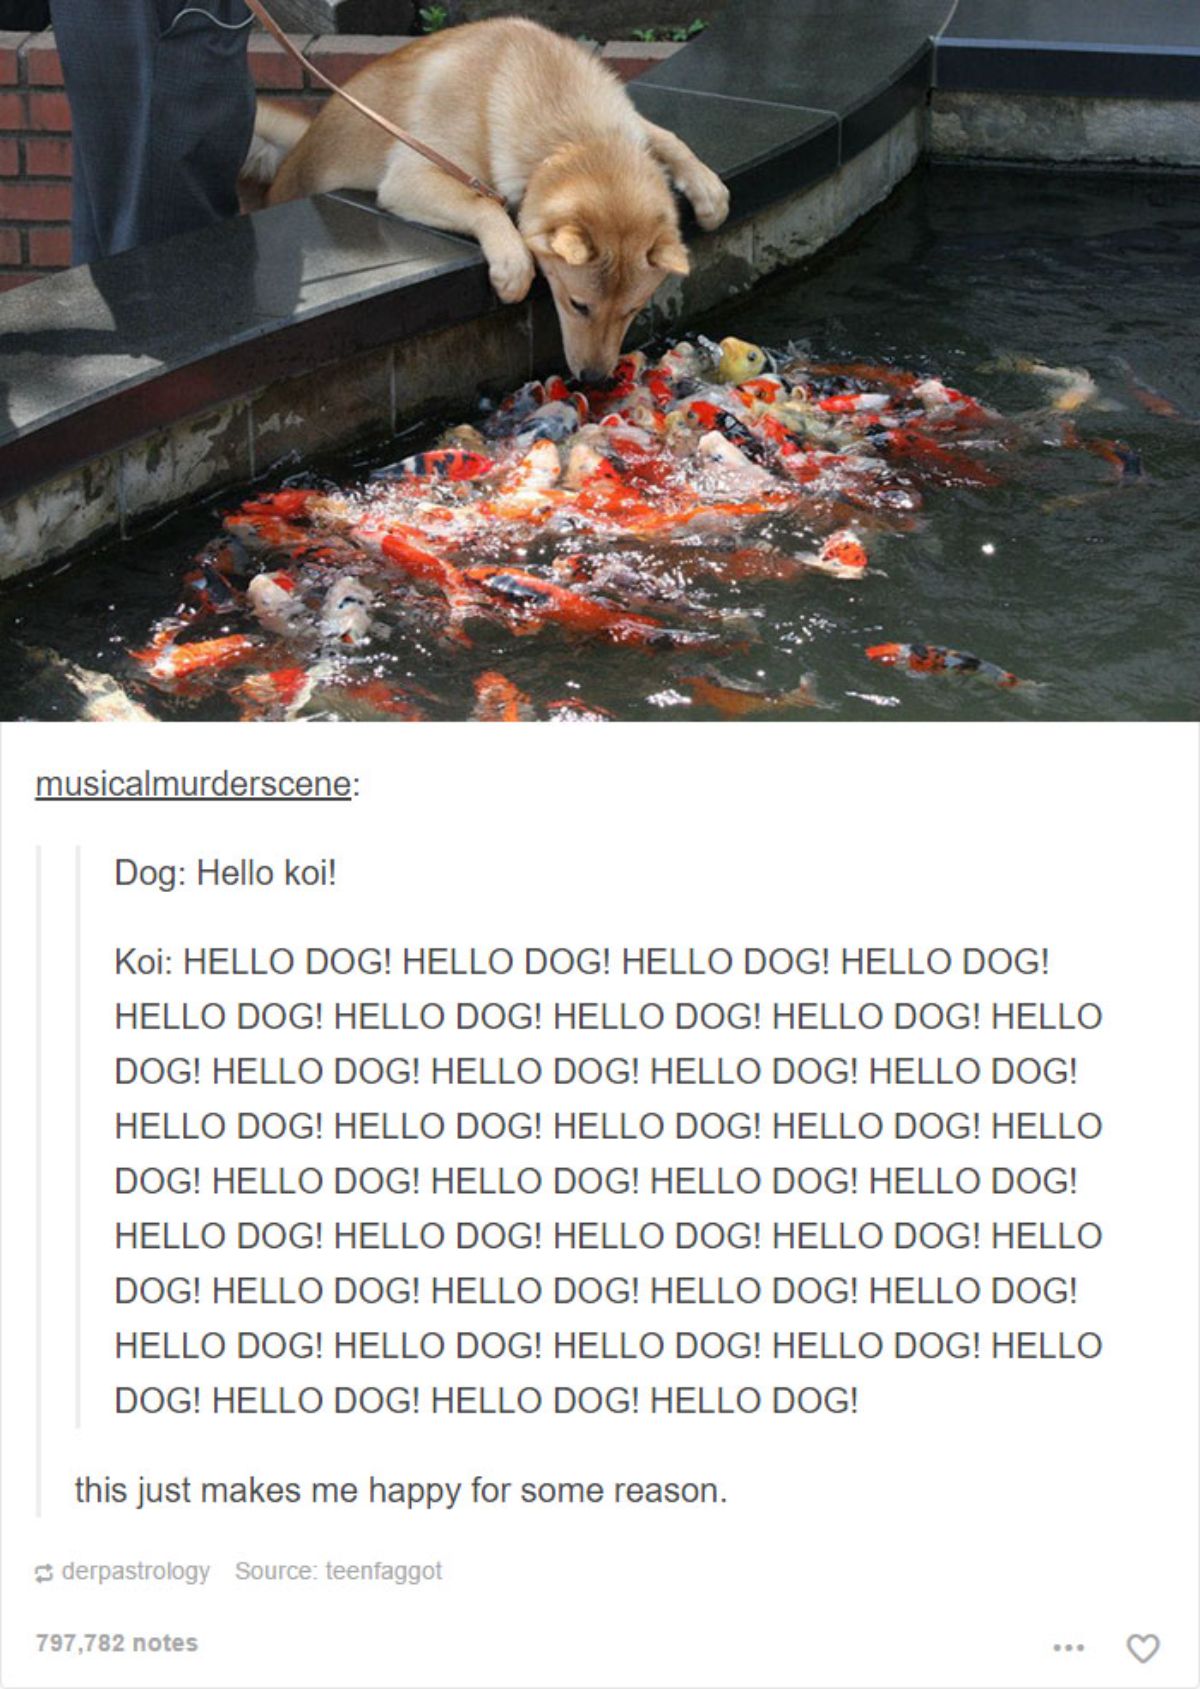 tumblr post of a brown shiba inu reaching into a pond full of koi fish and the caption says the dog says hello koi and the kois are saying hello dog repeatedly